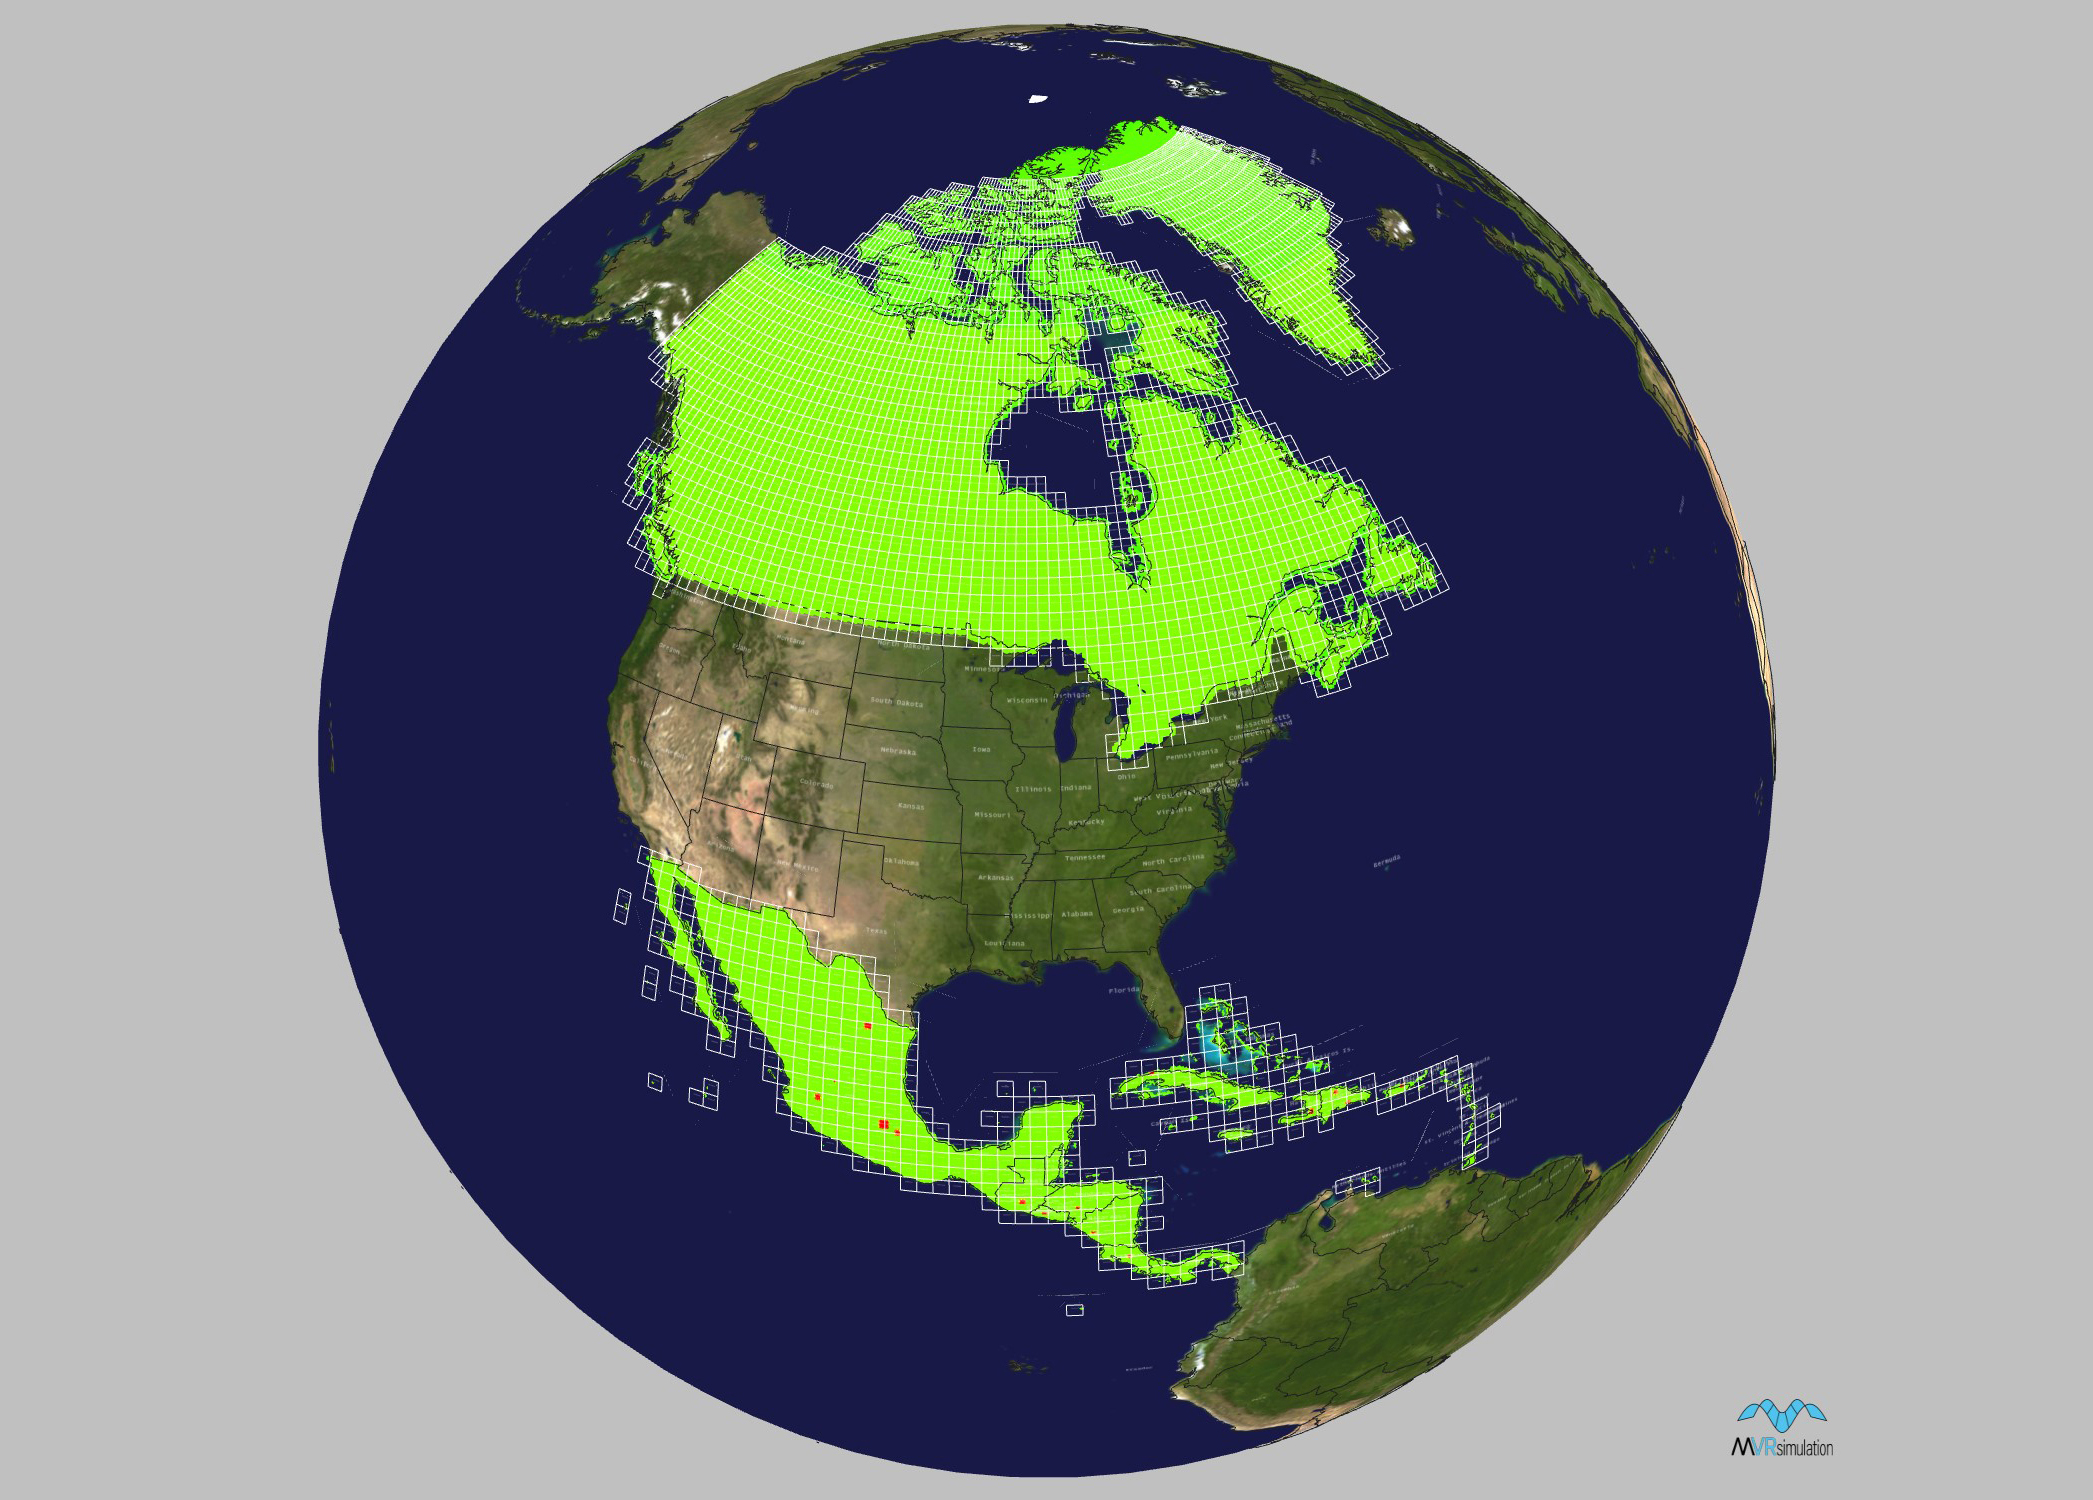 Geographic coverage of MetaVR's terrain tiles of North America (excluding the USA). 